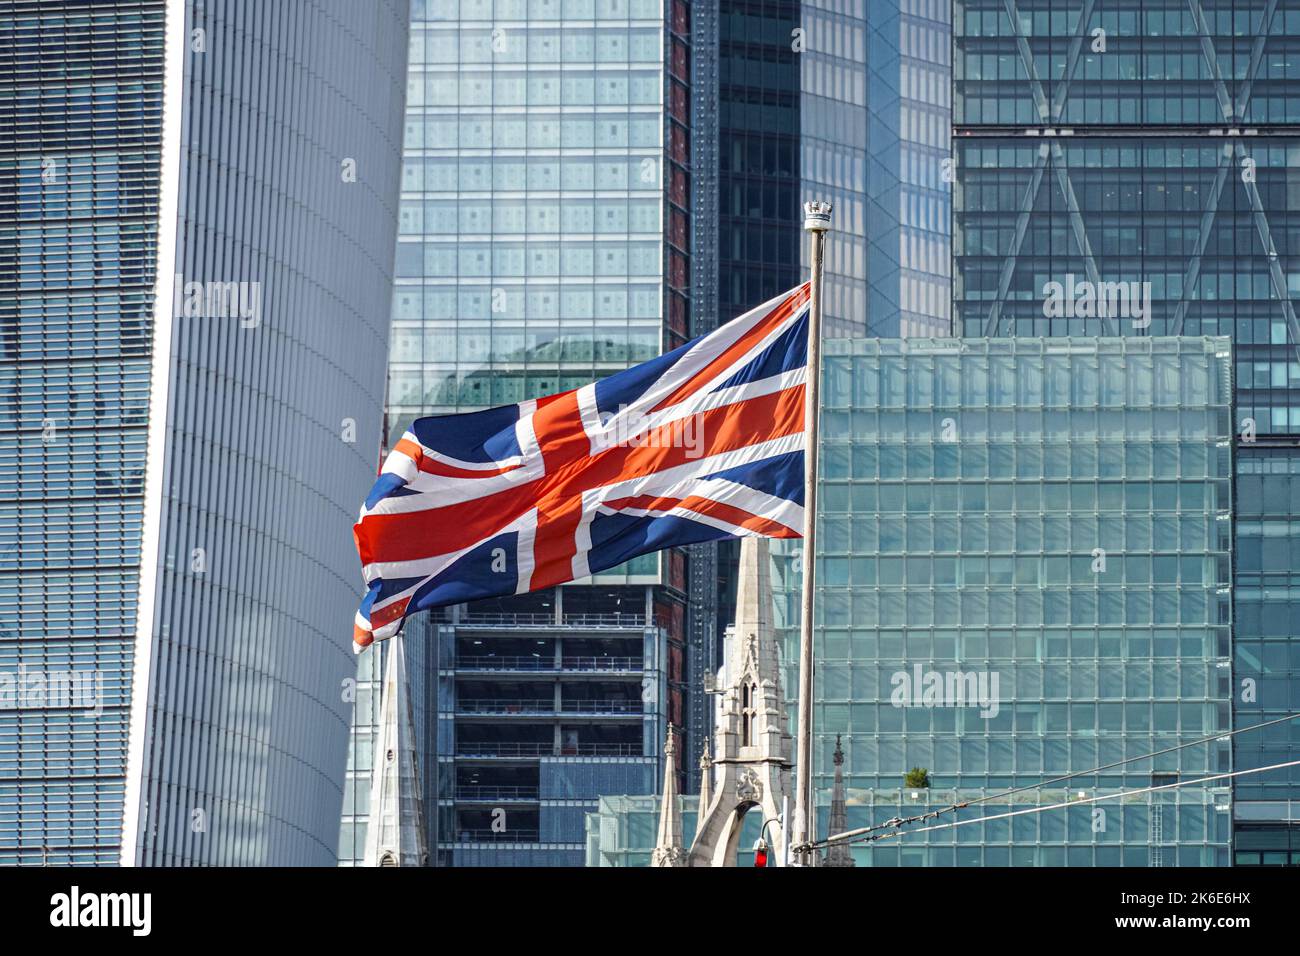 Union Jack flag in front of City of London skyscrapers, London England United Kingdom UK Stock Photo